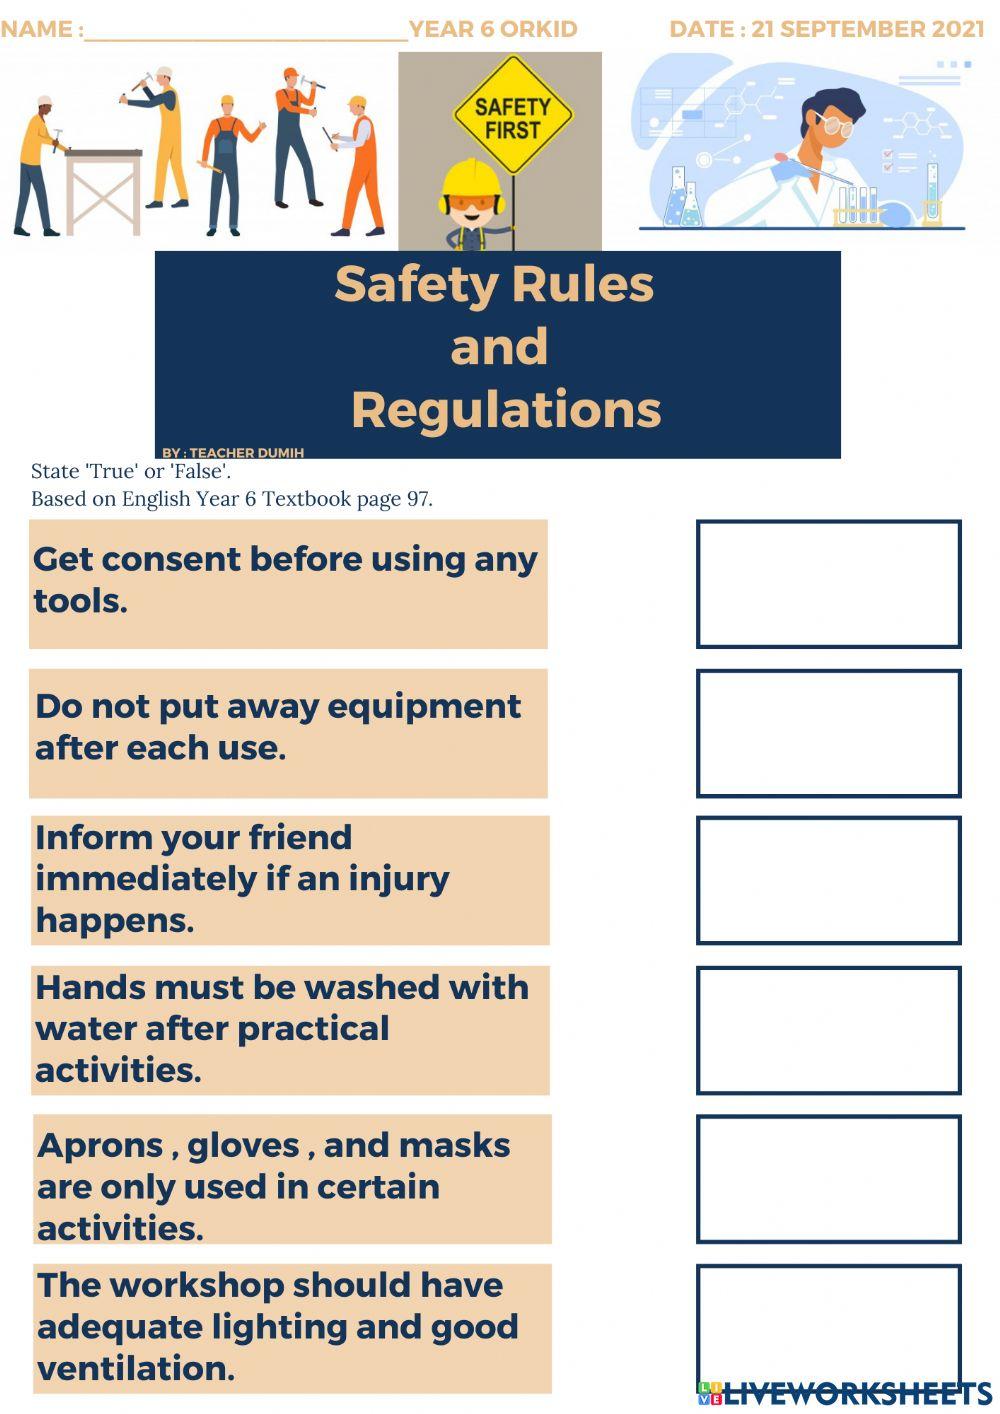 Safety rules and regulations